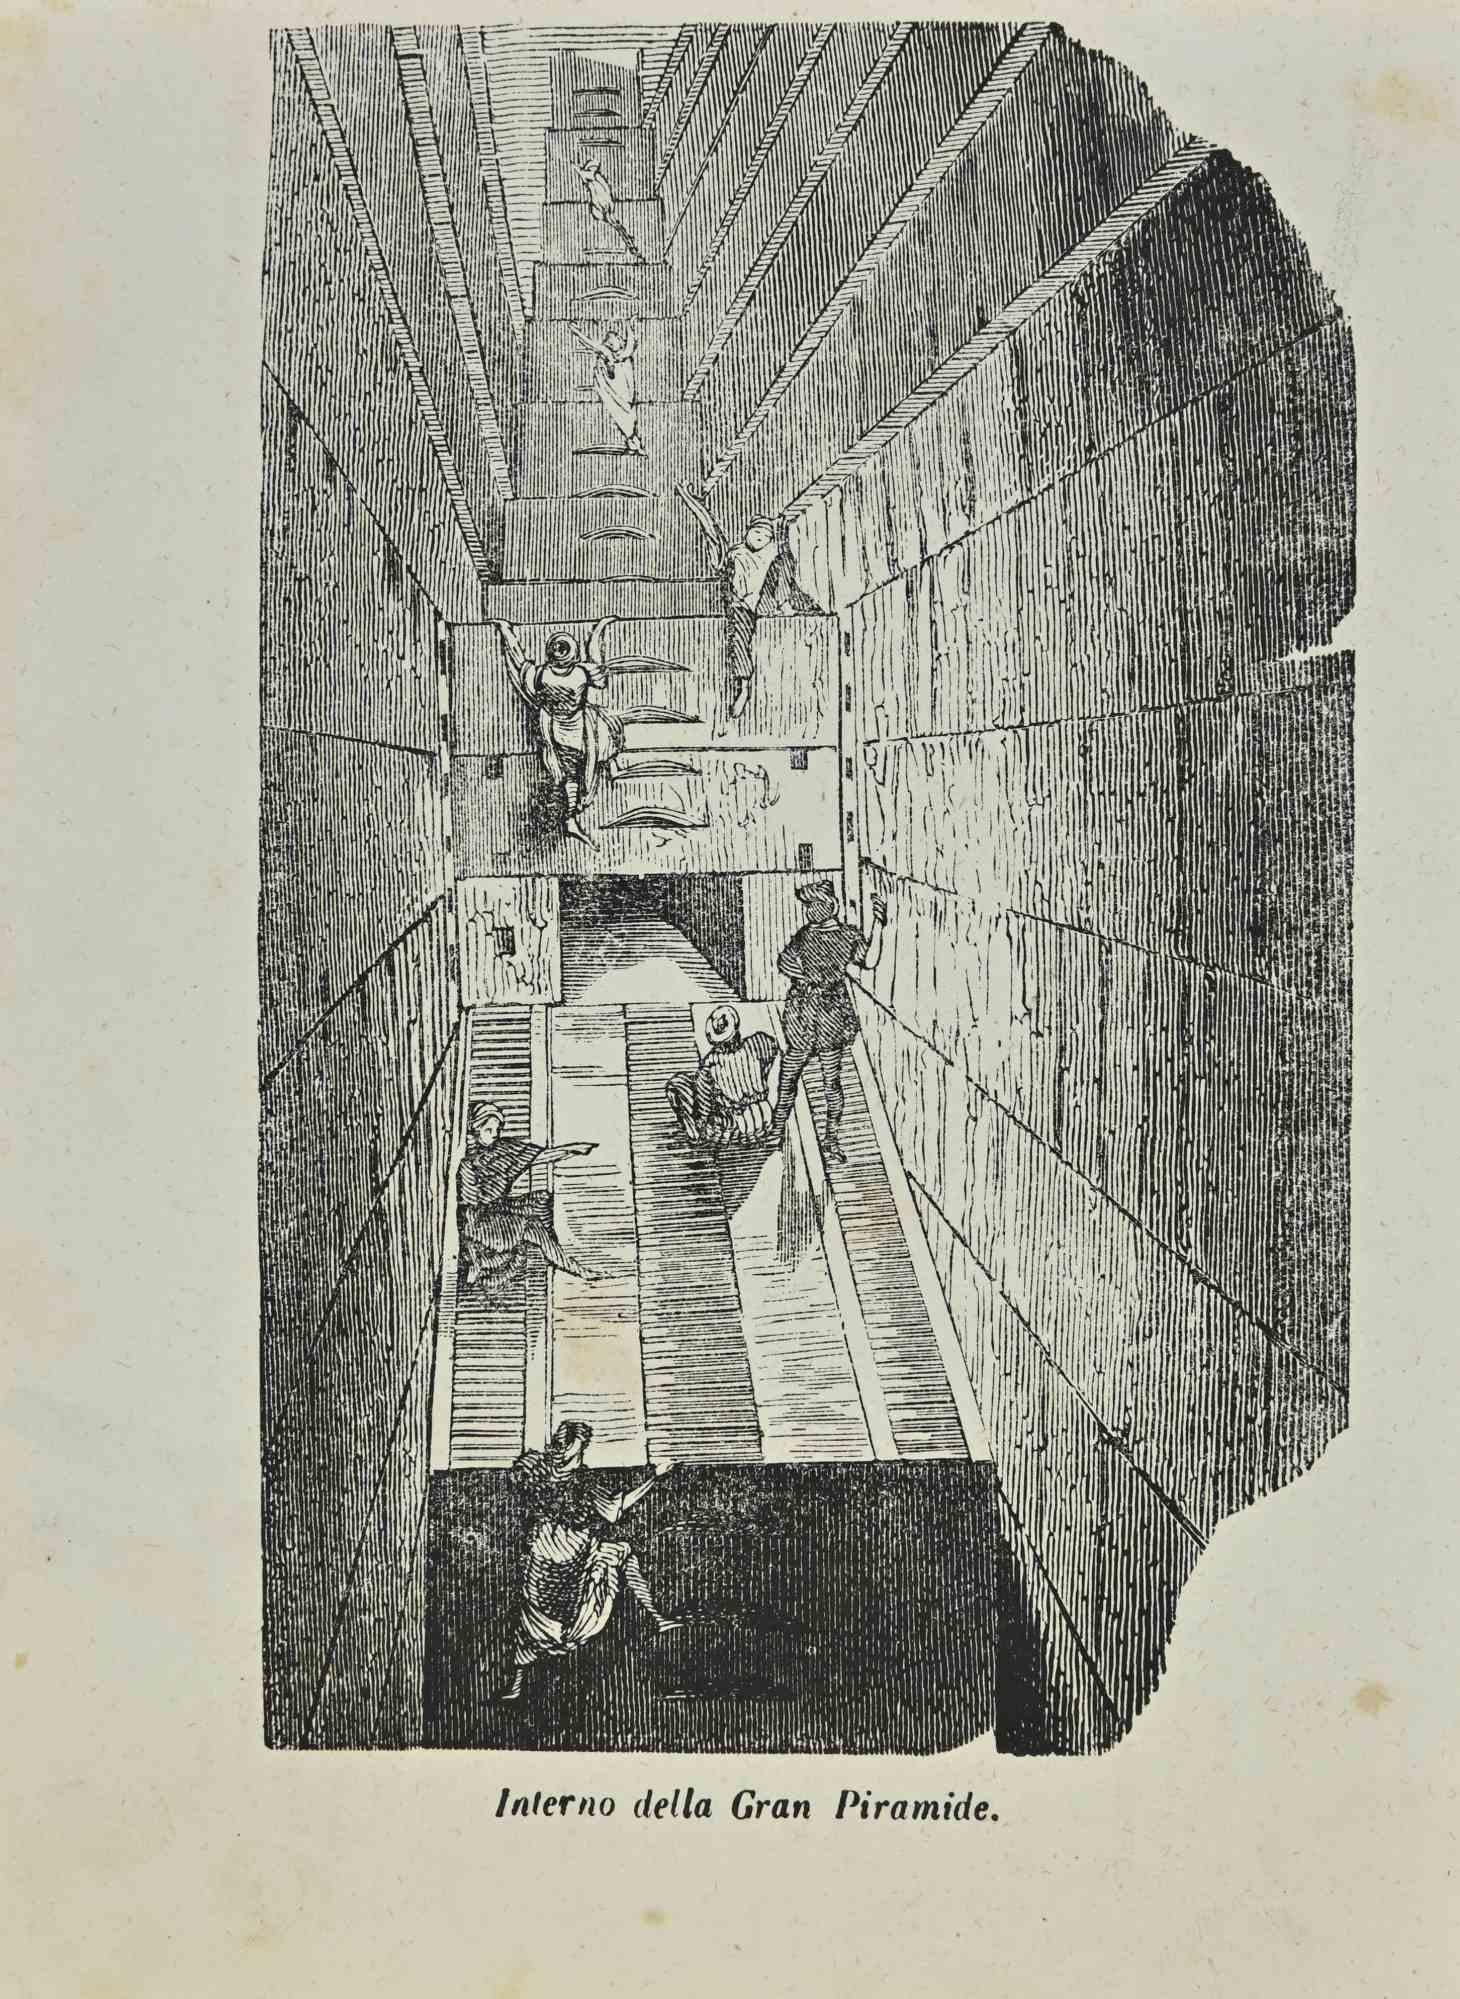 Interior of the Great Pyramid is a lithograph made by Auguste Wahlen in 1844.

Good condition.

At the center of the artwork is the original title "Interno della Gran Piramide".

The work is part of Suite Moeurs, usages et costumes de tous les